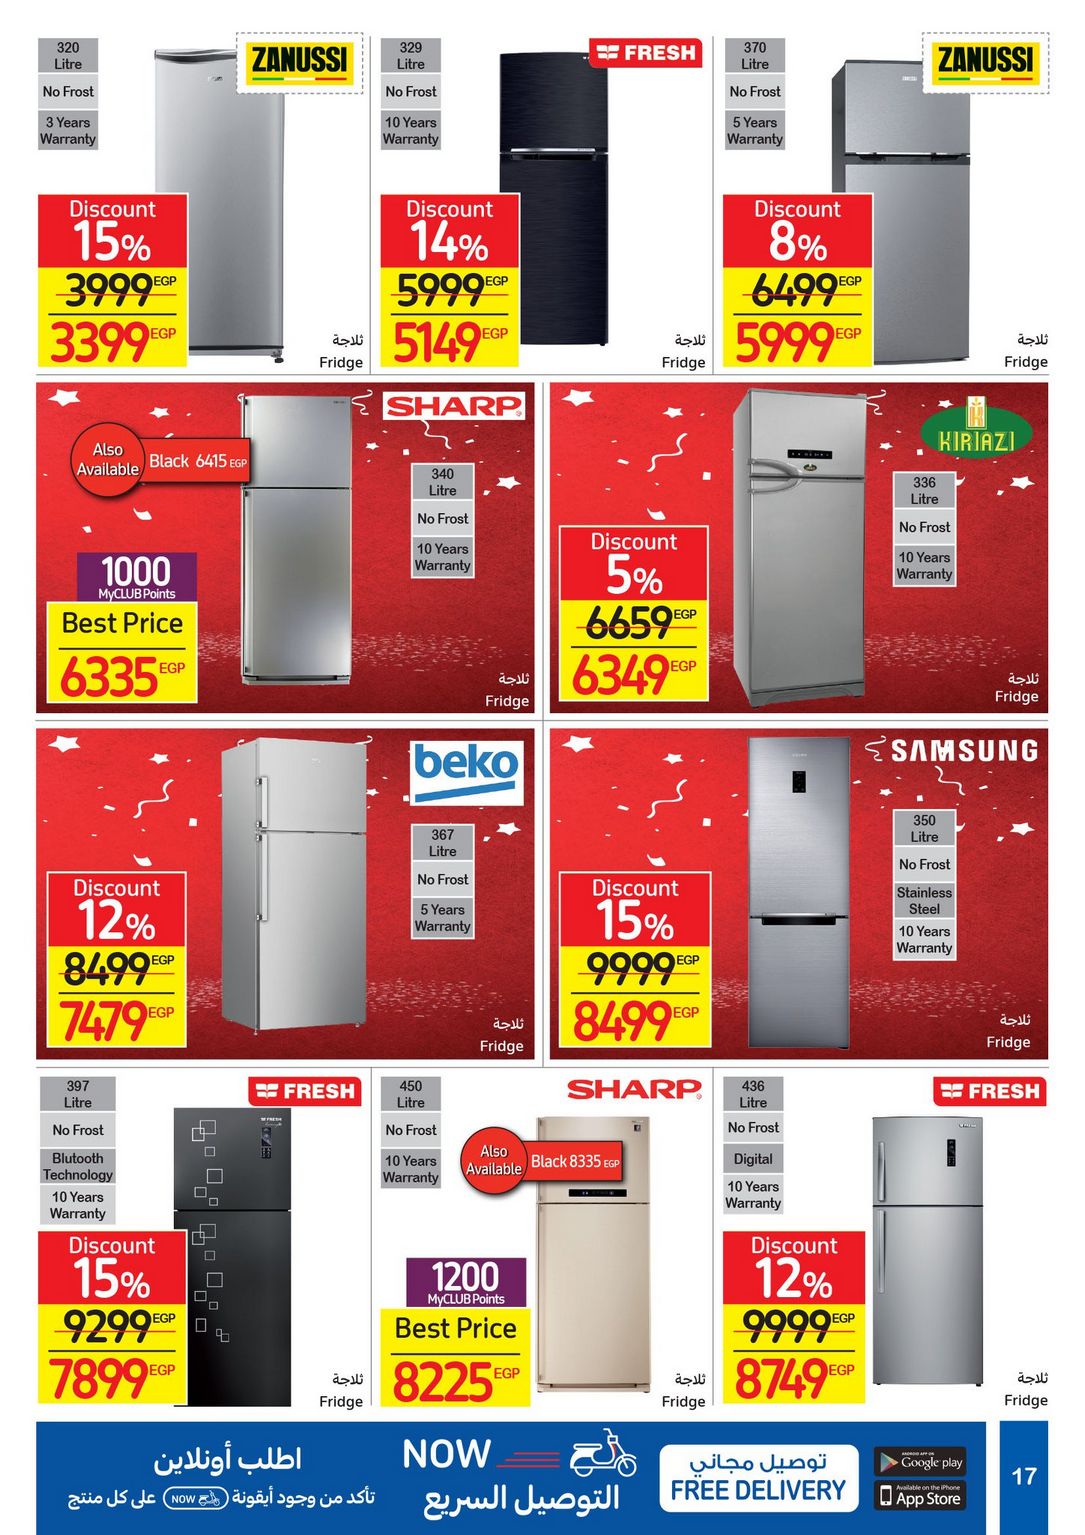 Carrefour Anniversary Offers till 18/2/2021 | Carrefour Egypt 19